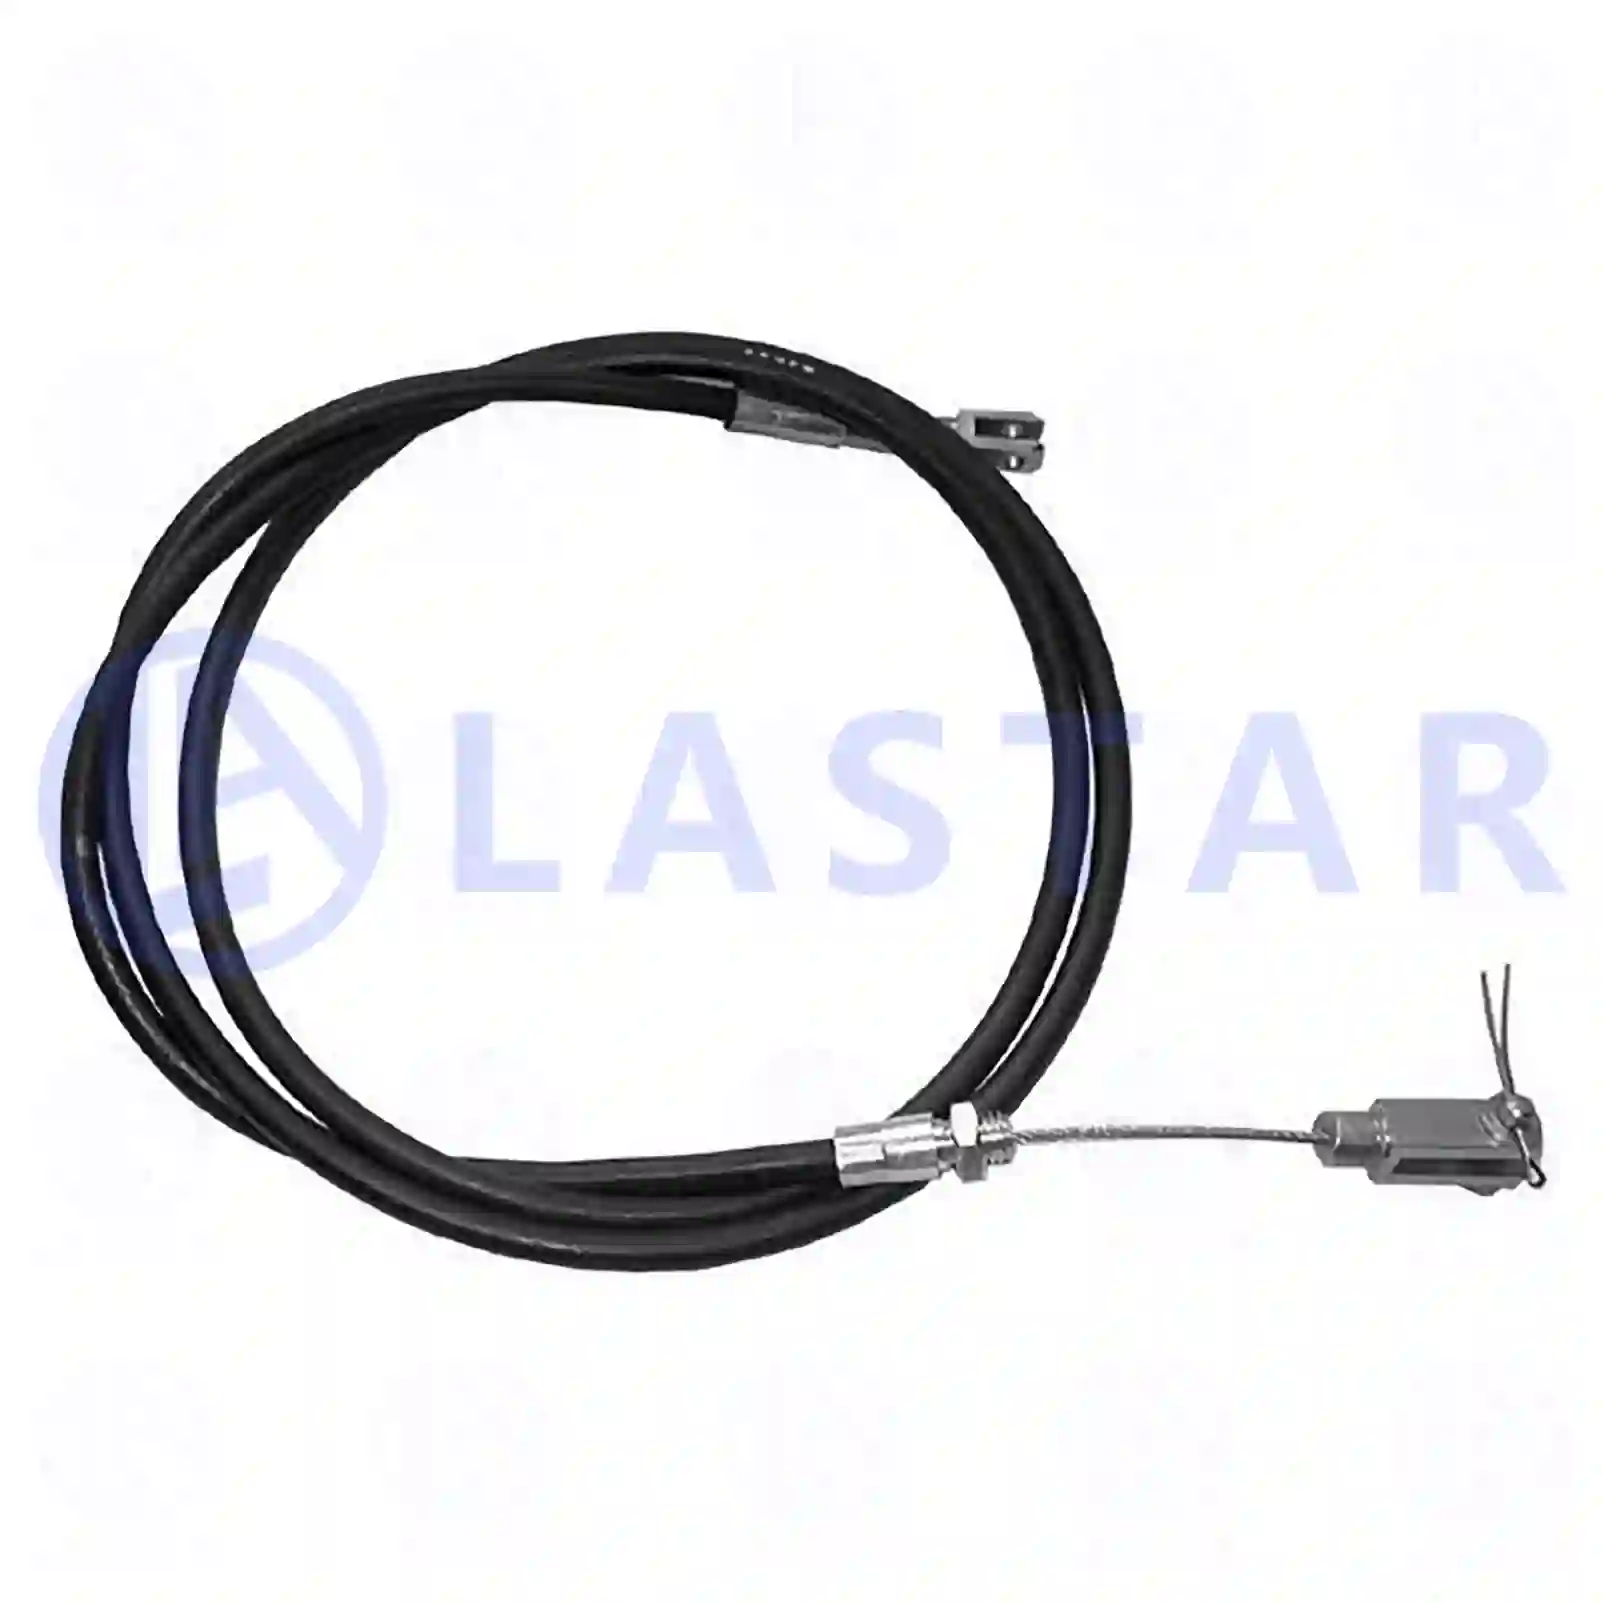 Control wire, front flap, 77721494, 1384394, ZG60421-0008 ||  77721494 Lastar Spare Part | Truck Spare Parts, Auotomotive Spare Parts Control wire, front flap, 77721494, 1384394, ZG60421-0008 ||  77721494 Lastar Spare Part | Truck Spare Parts, Auotomotive Spare Parts